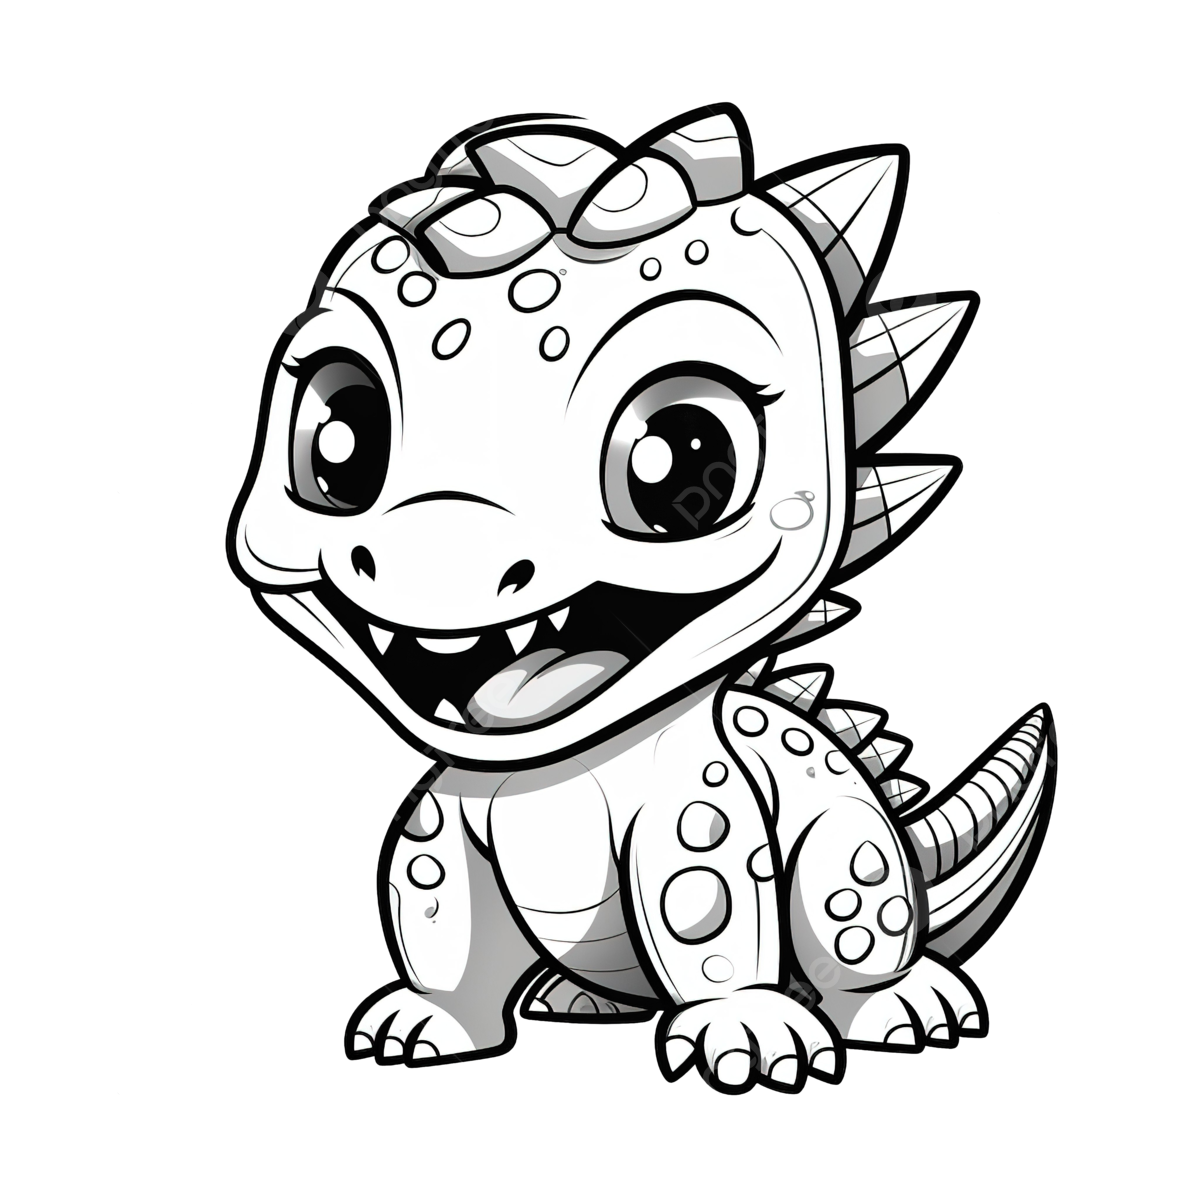 Dinosaur cartoon doodle kawaii anime coloring page cute illustration drawing clip art character chibi manga ics car drawing anime drawing cartoon drawing png transparent image and clipart for free download